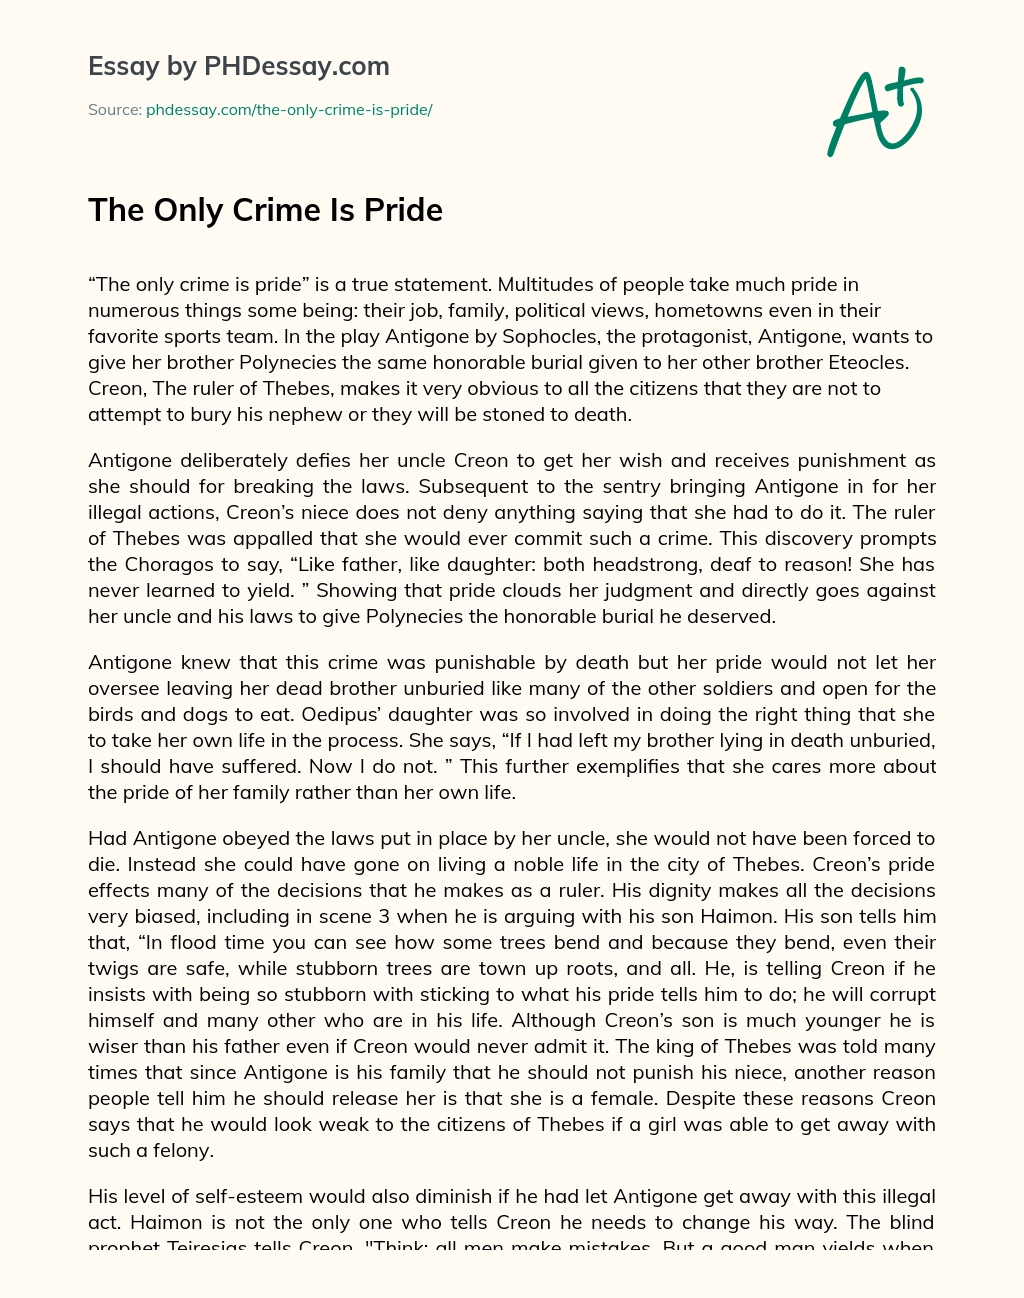 The Only Crime Is Pride essay